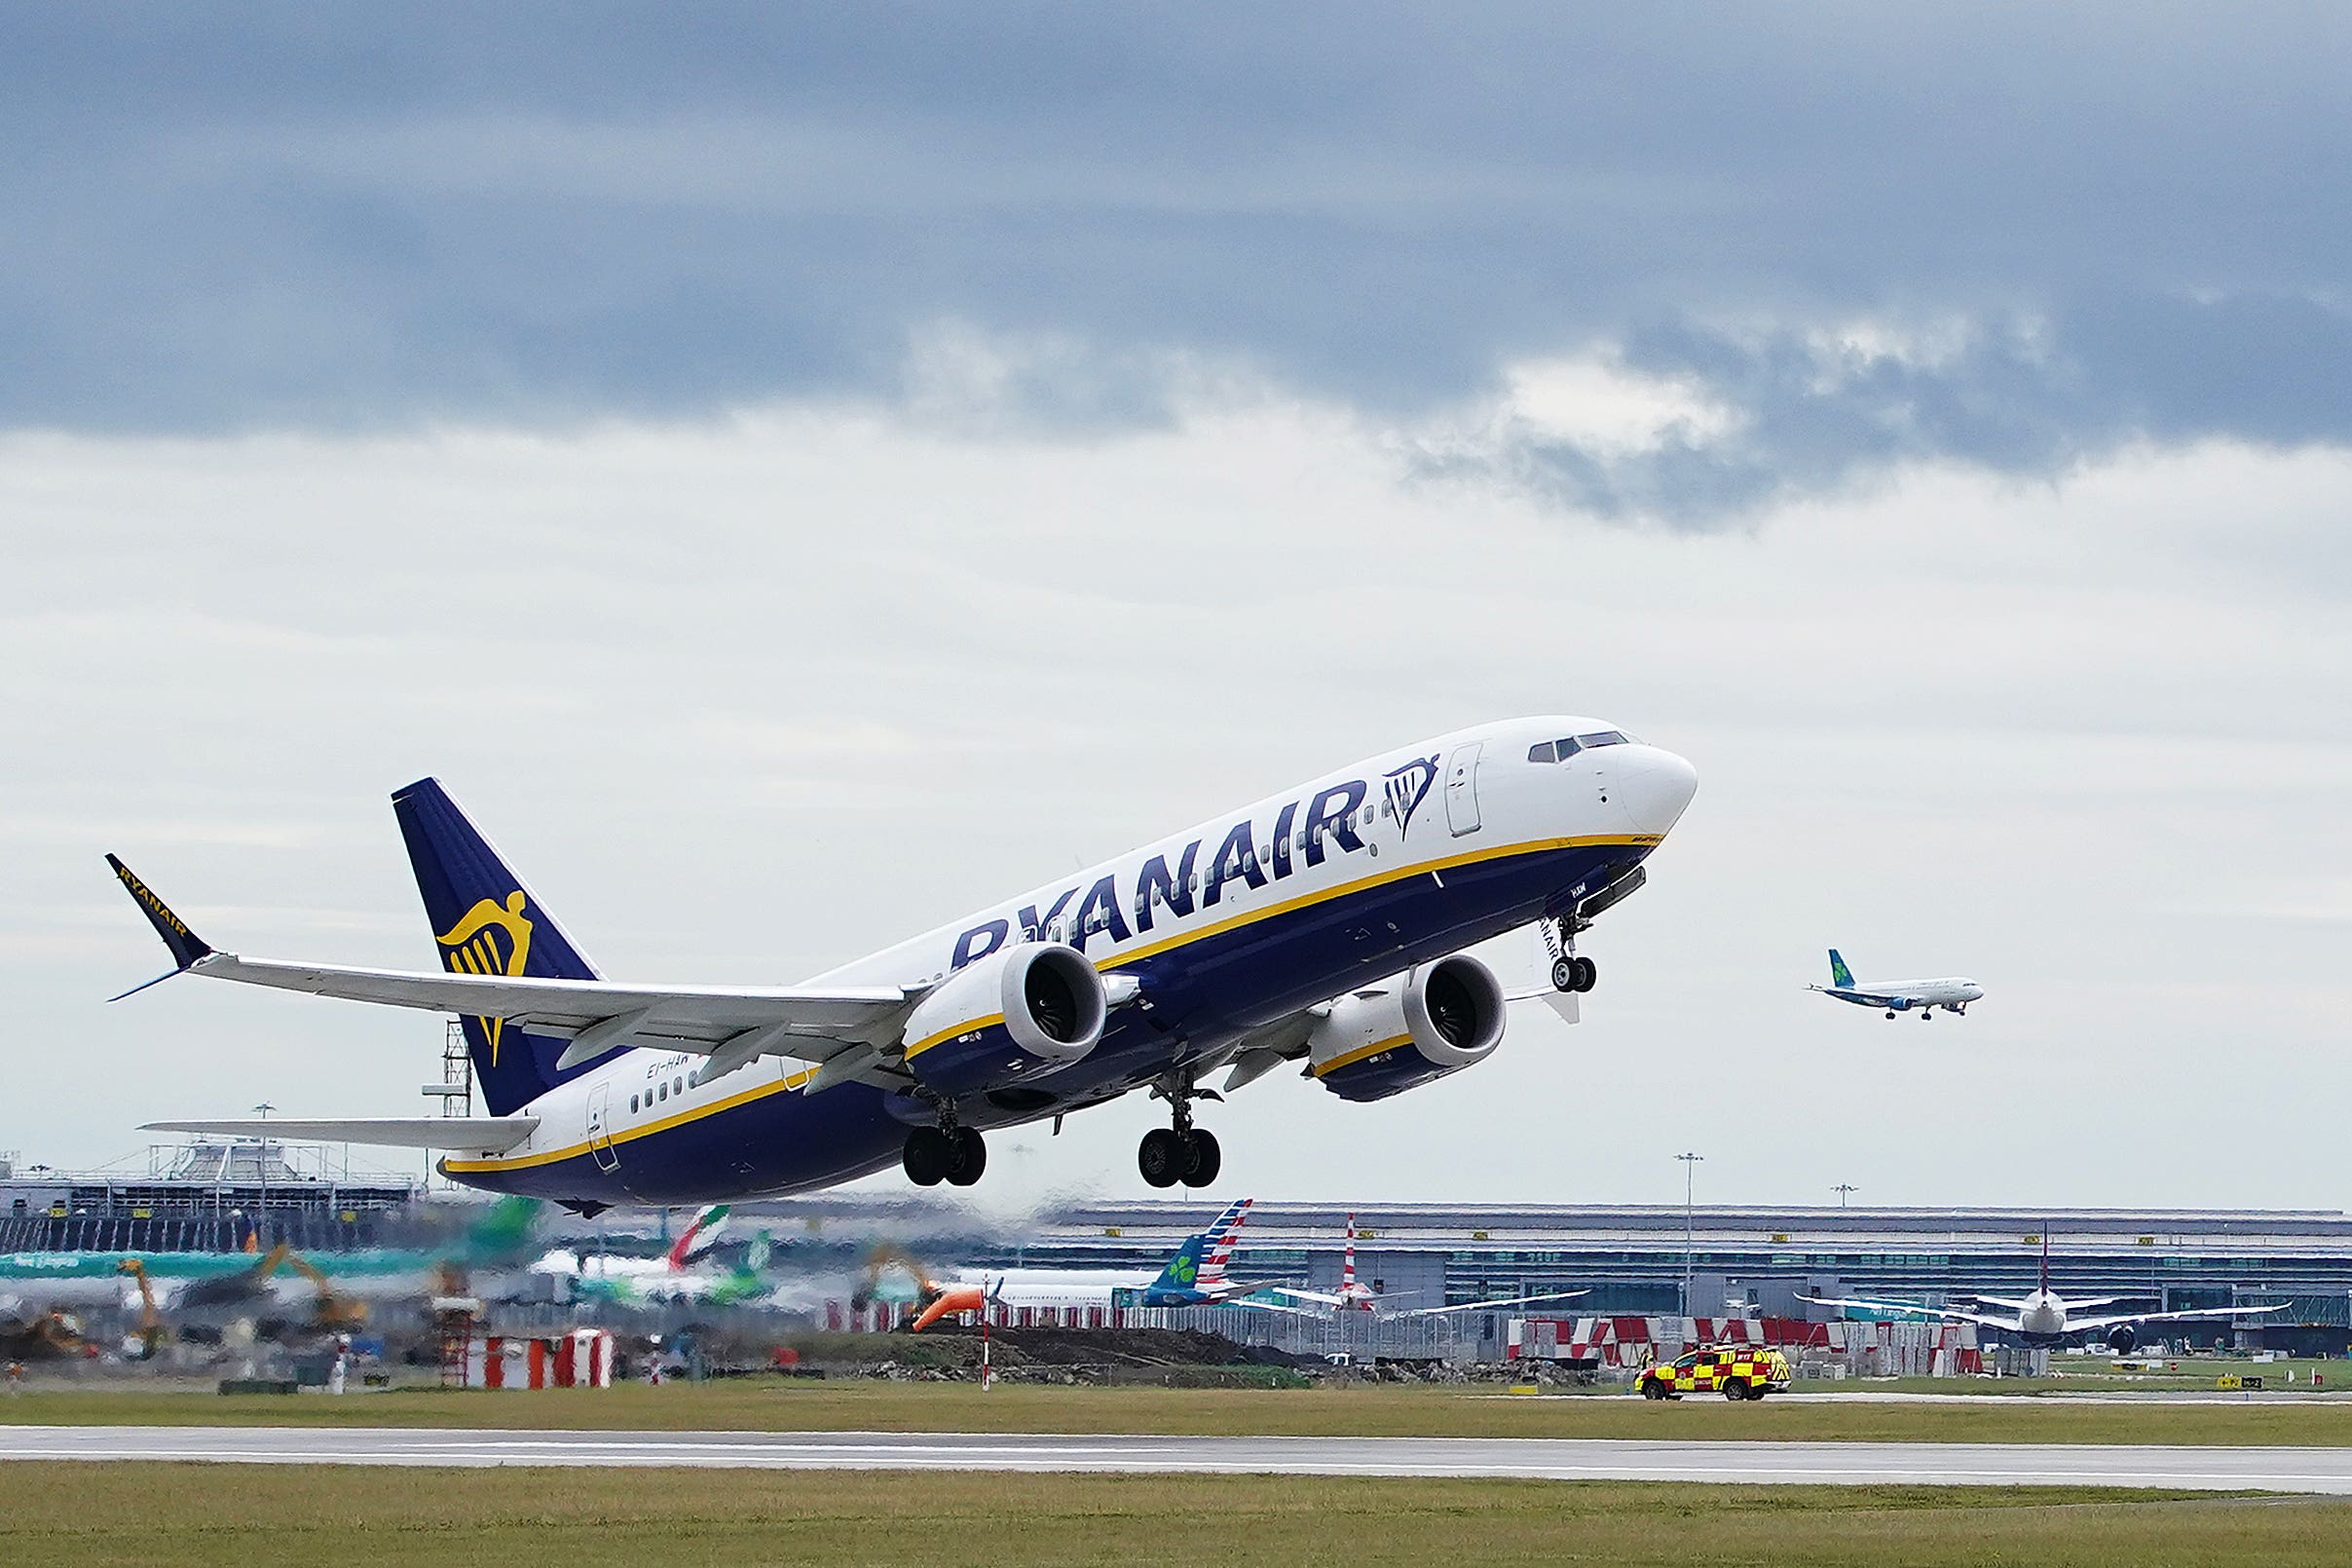 ryanair boss labels ministers dunces in furious row over passenger cap